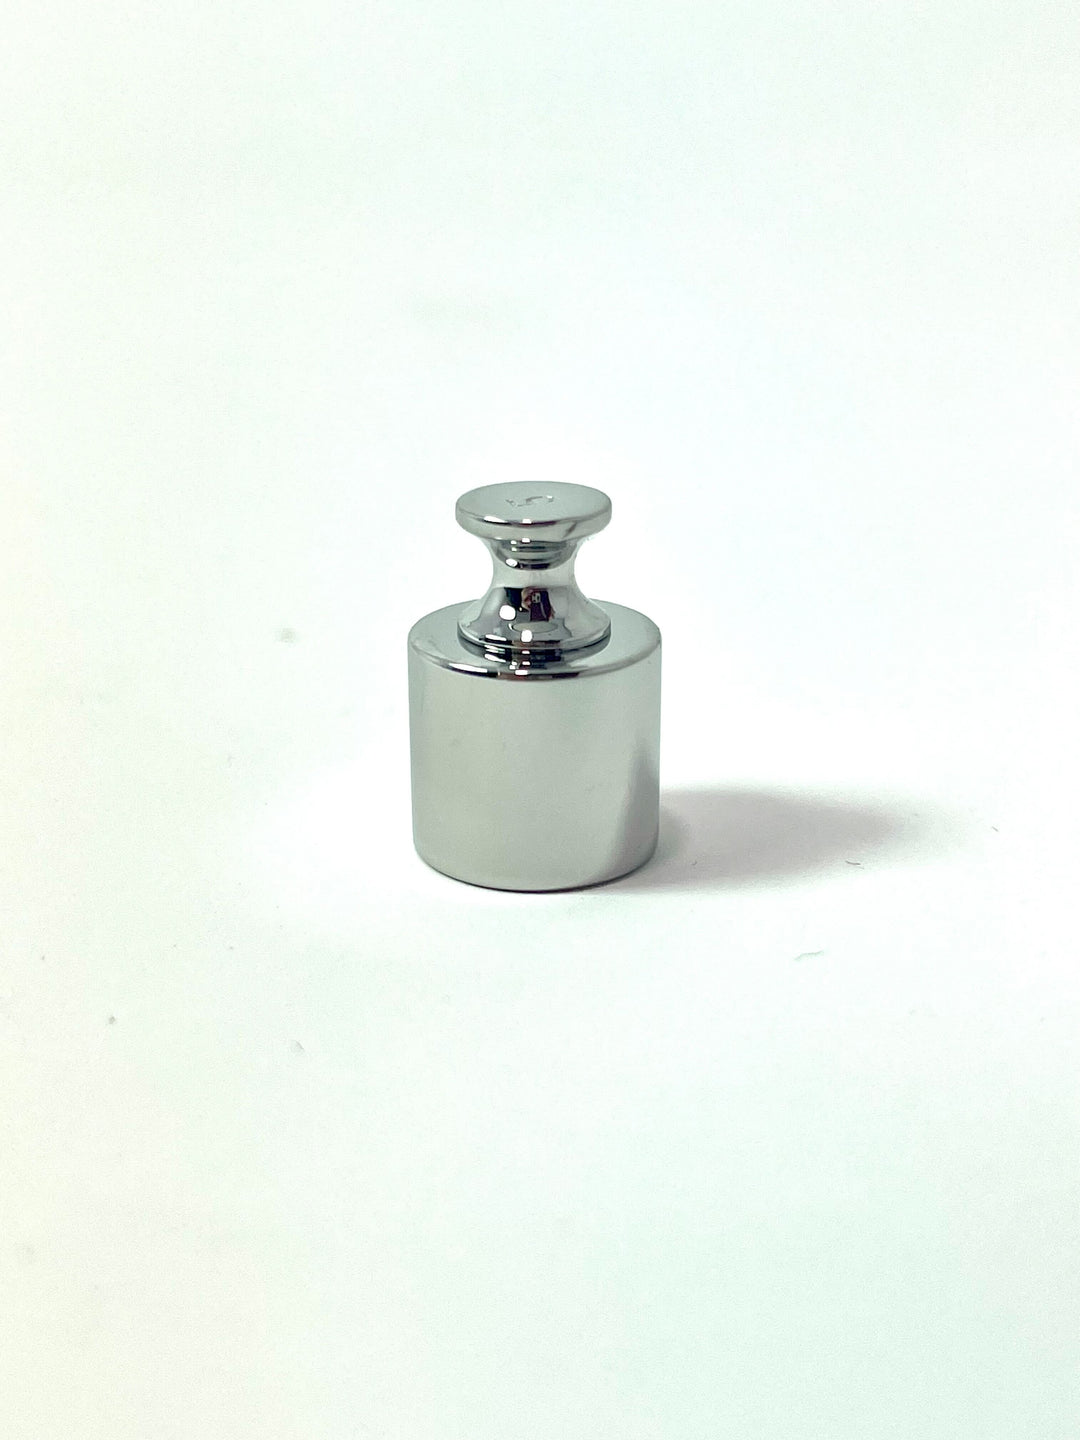 Stainless Steel Calibration Weights - No Certification